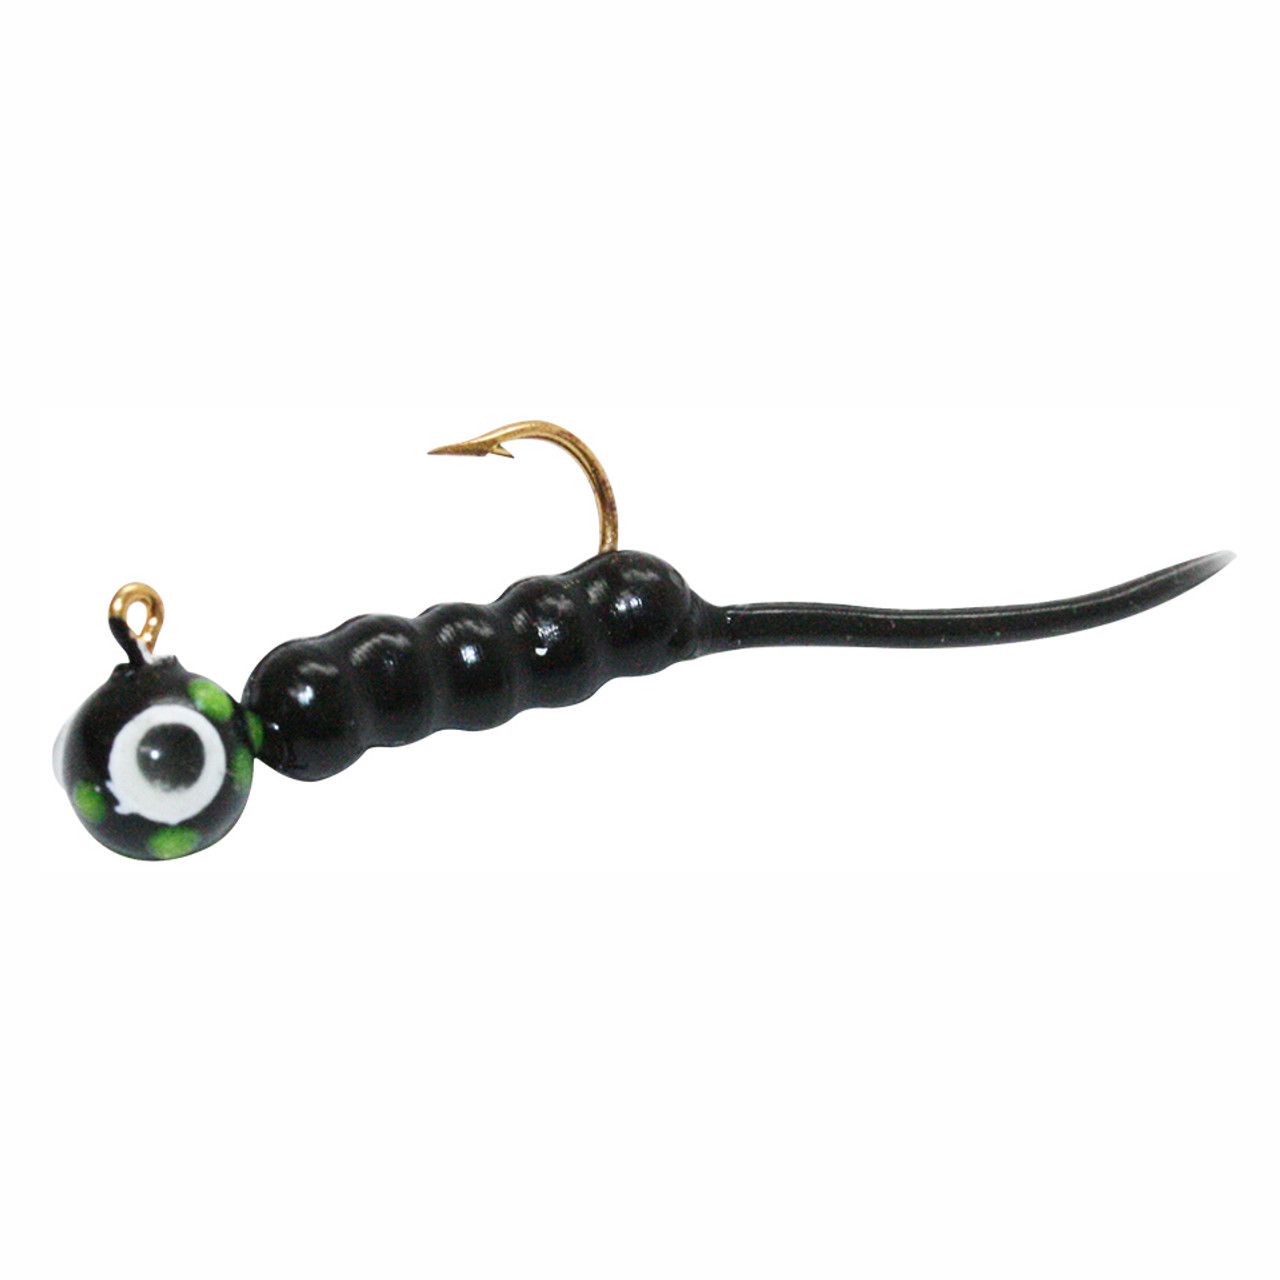 Tutso Tungsten Jig: a Must Have Lure for Catching More on Ice